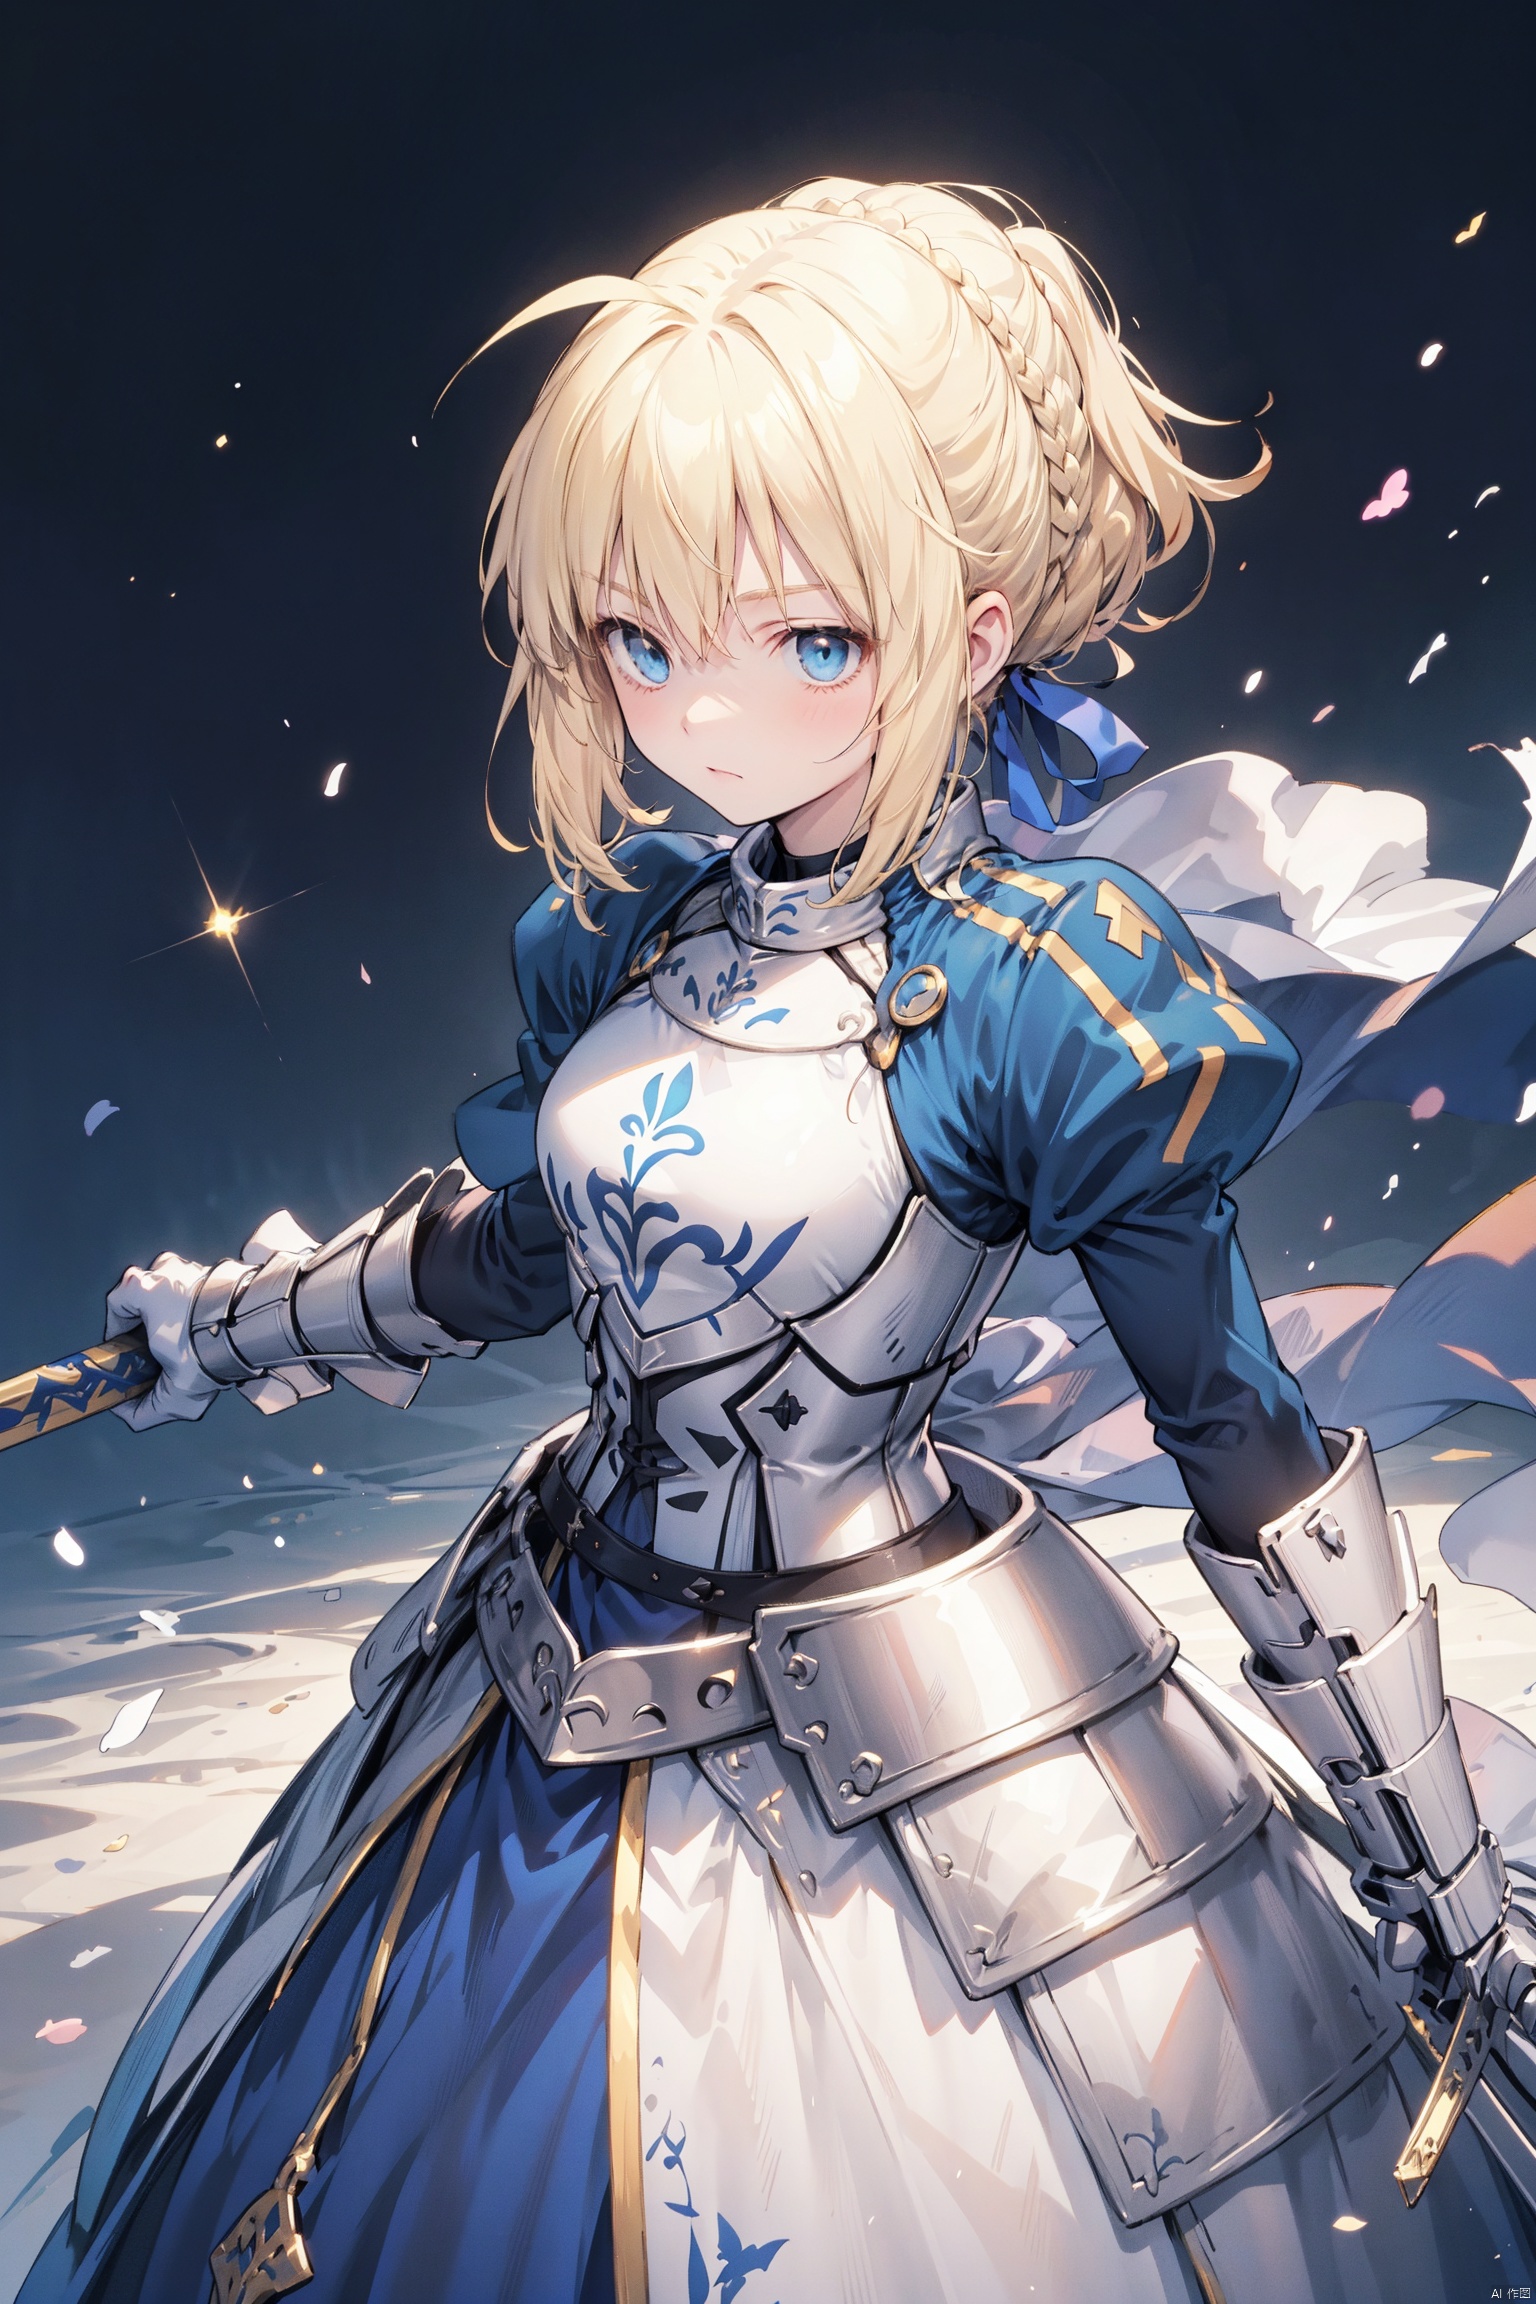 Artoria Pendragon, the female protagonist of Fate/Stay Night, is depicted in a powerful armor and wielding the Excalibur. Her blonde hair is pulled back into a tight braid.She appears focused and determined, ready to take on any challenge that comes her way., phSaber